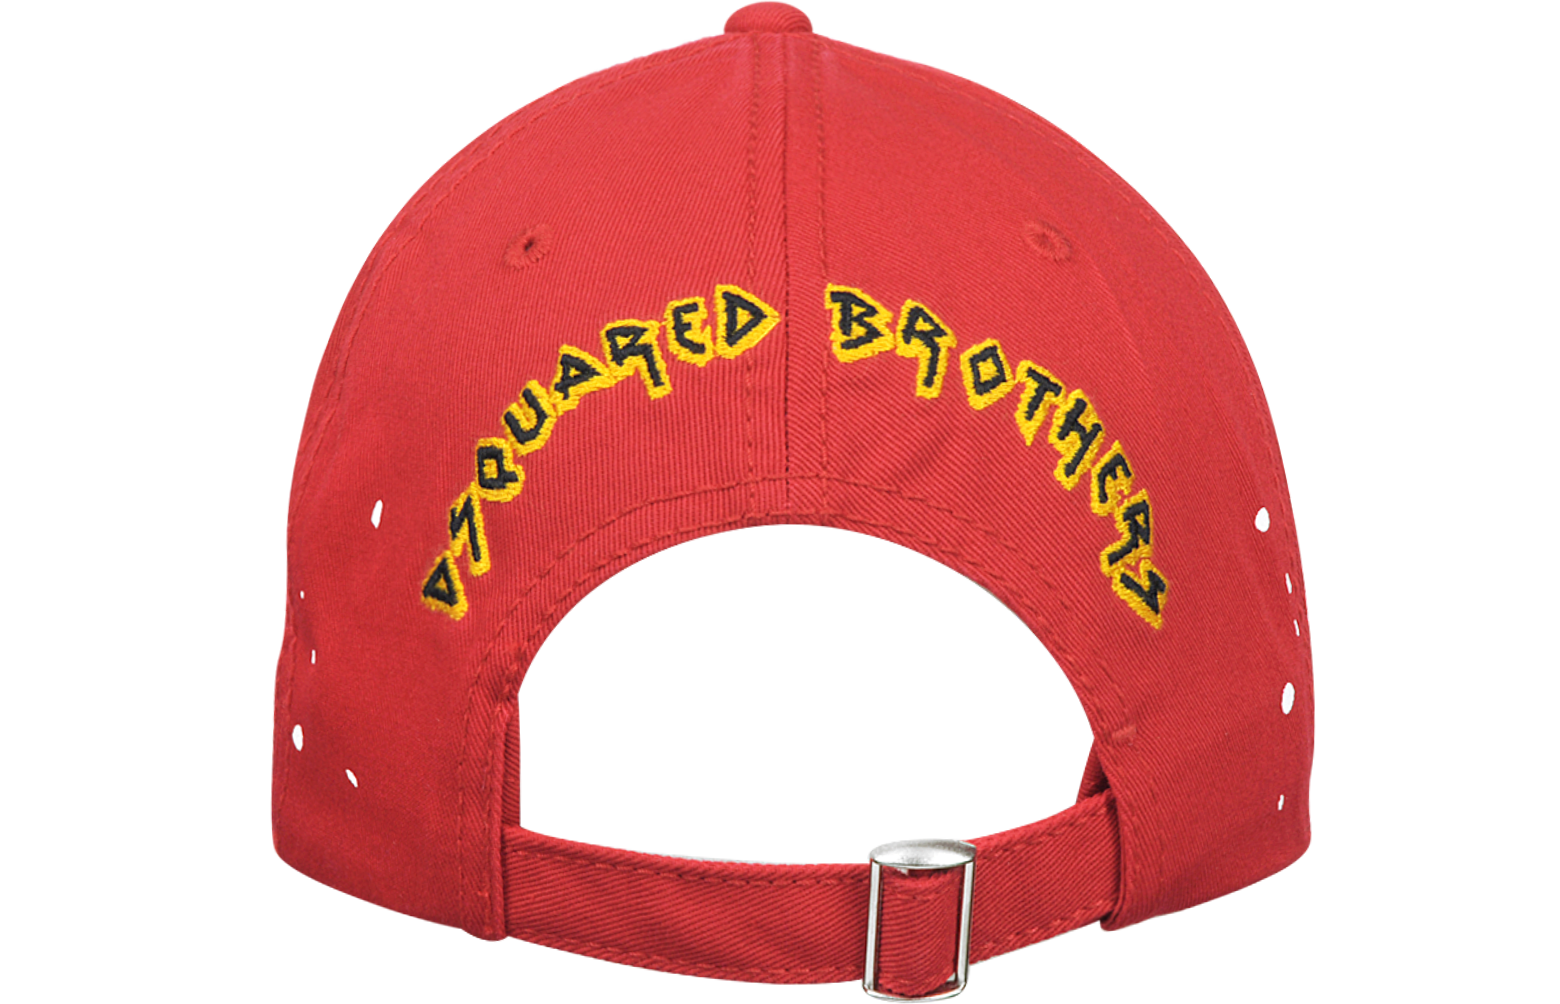 casquette dsquared rouge caten band